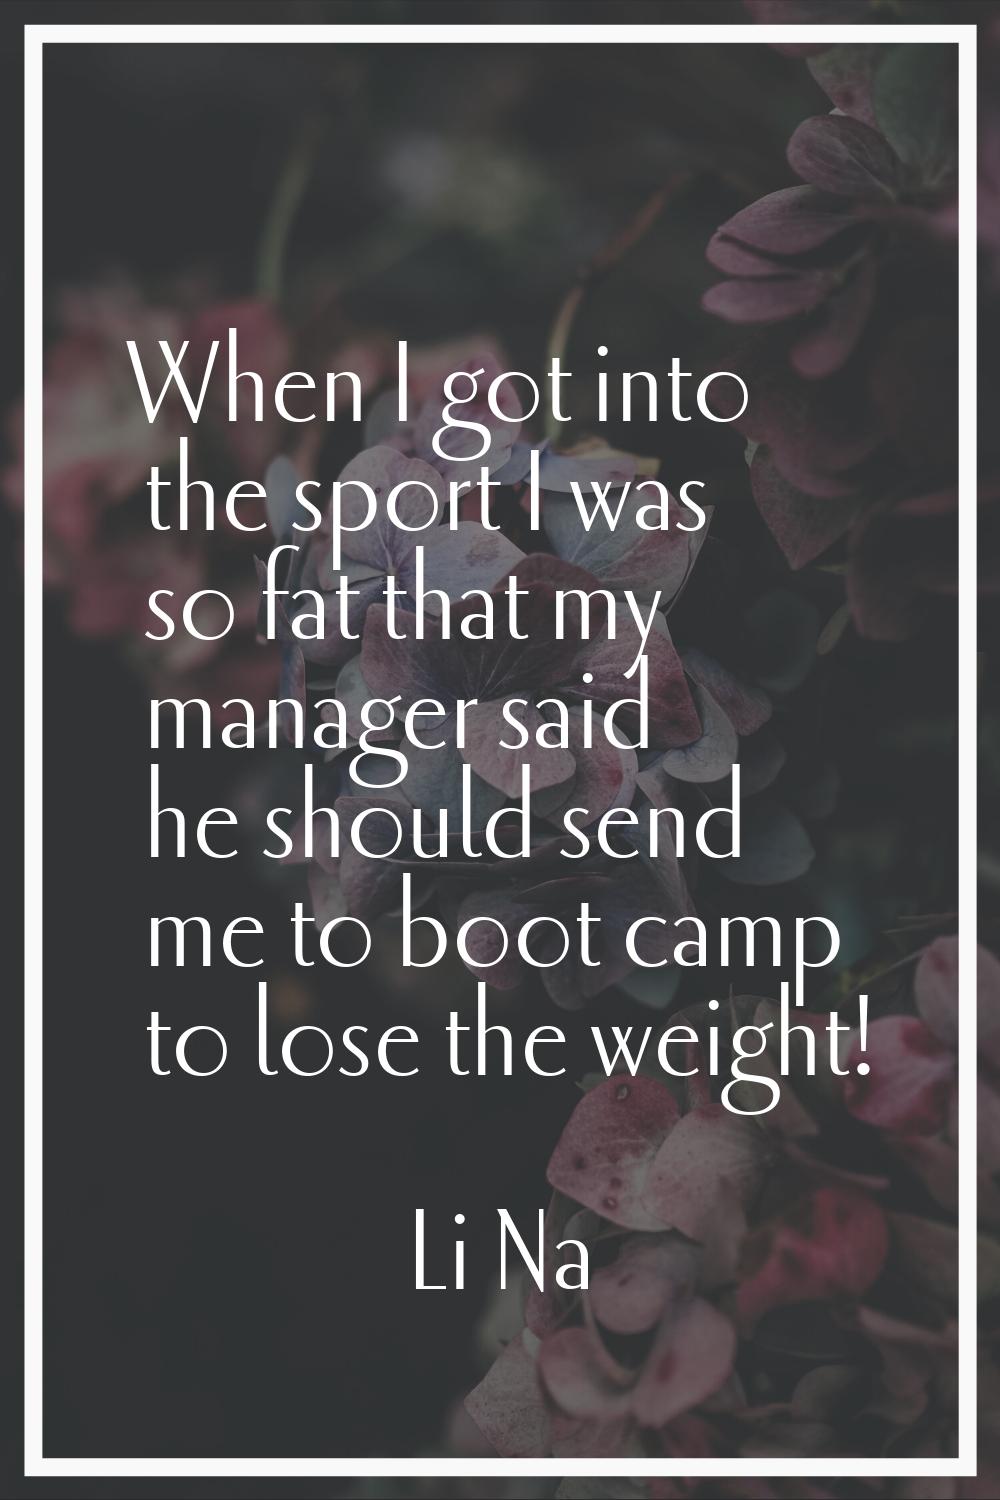 When I got into the sport I was so fat that my manager said he should send me to boot camp to lose 